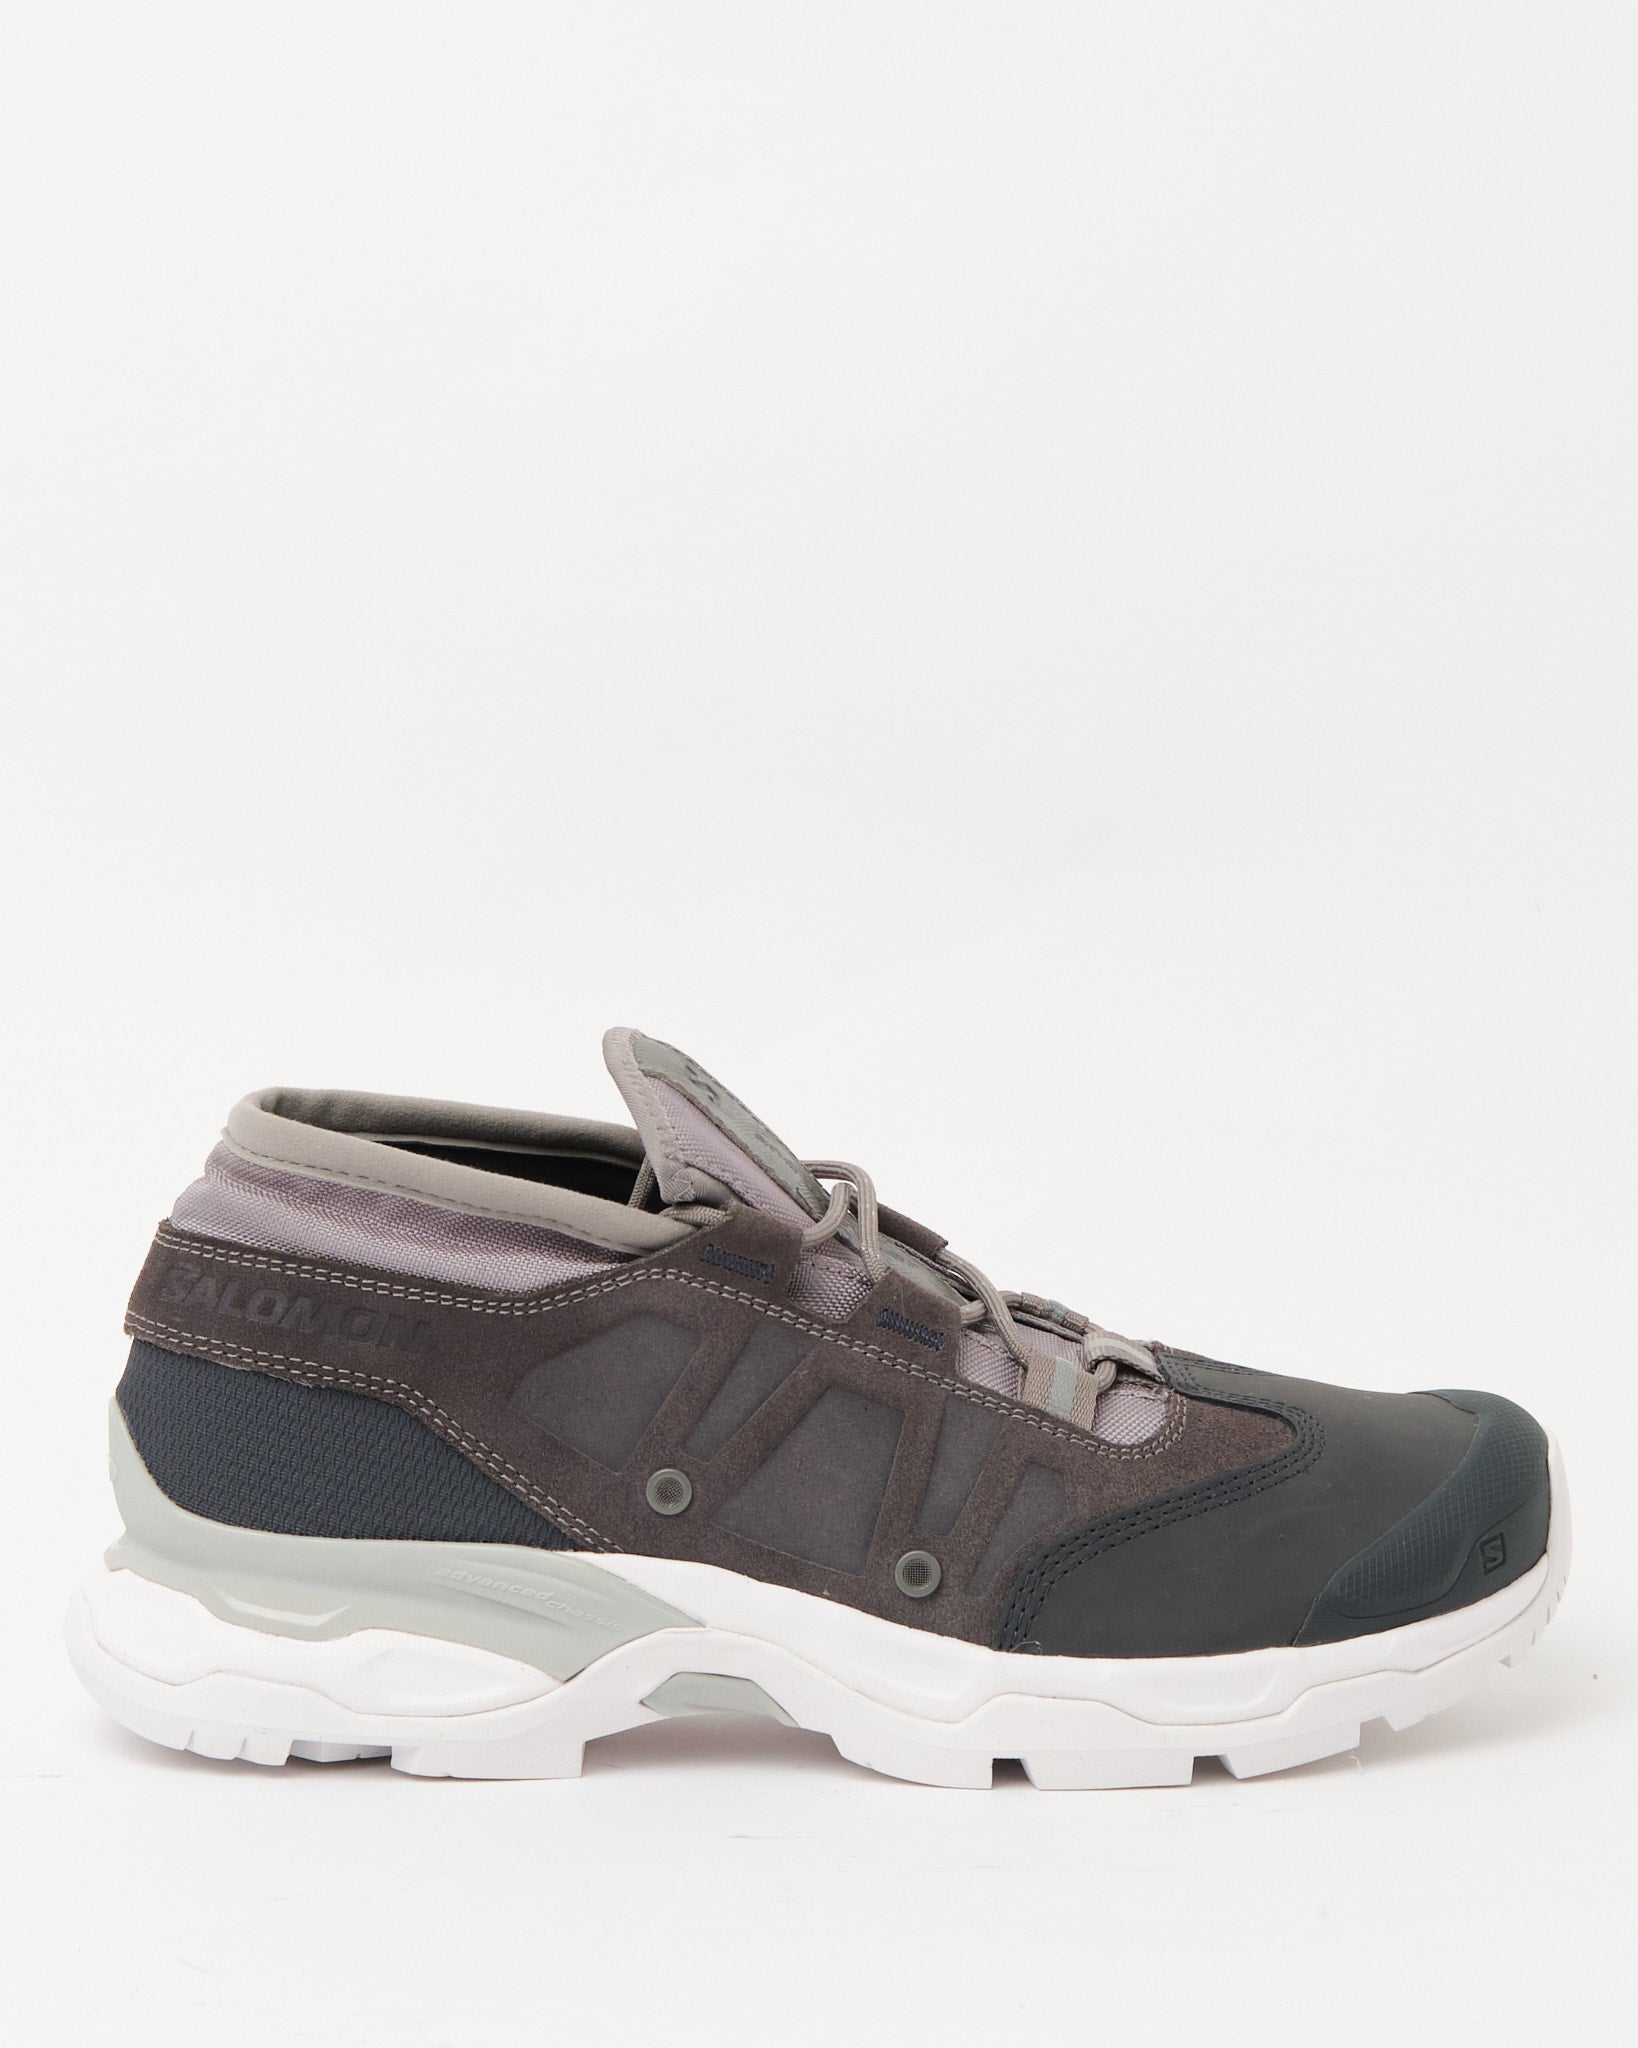 salomon Jungle Ultra low for and wander grey col. 020 - Meadow